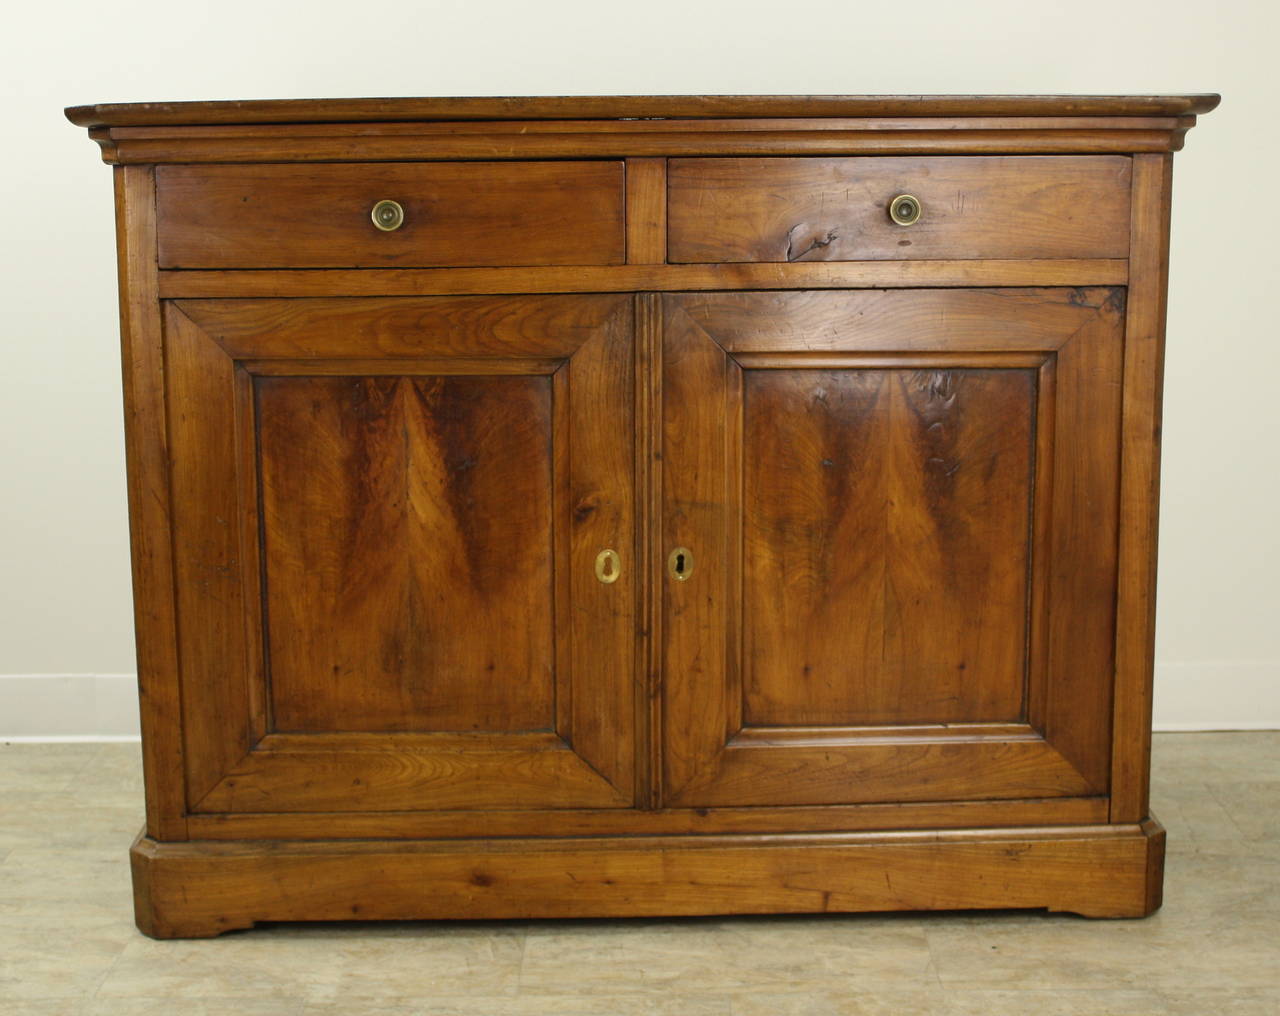 A smaller, slim cherry buffet with marvelous dramatic grain, especially on the inset door panels.  Elegant and simple in the Louie Philippe style.  Two bottom doors open to a roomy storage space with a single shelf.  Top has nice contrasting colors